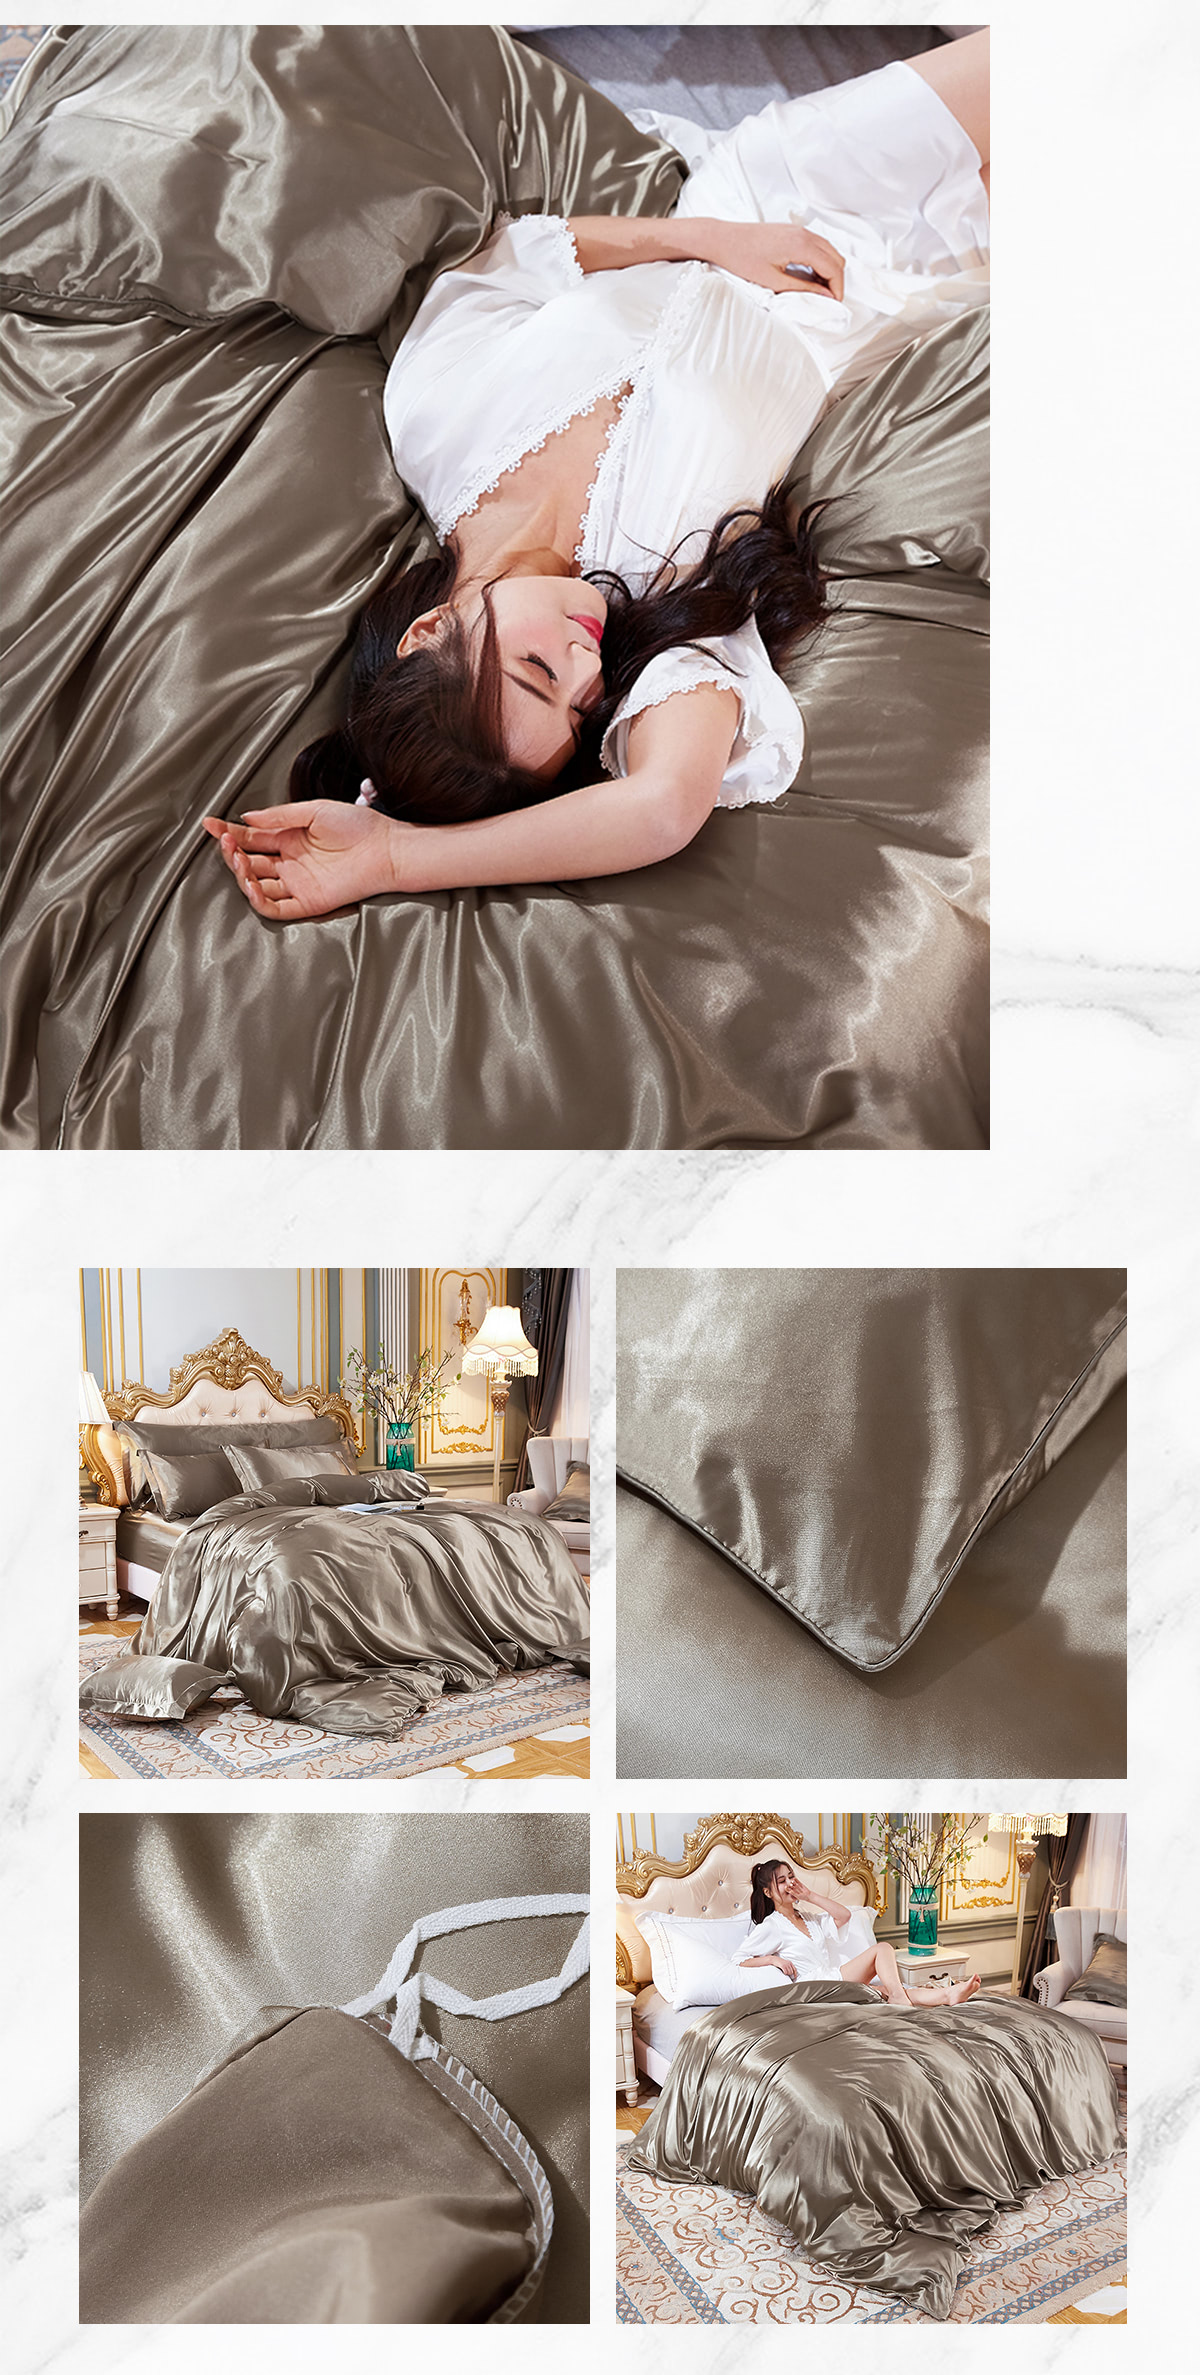 4-Piece-Soft-Silky-Satin-Solid-Color-Bed-Sheet-Pillowcases-Set22.jpg